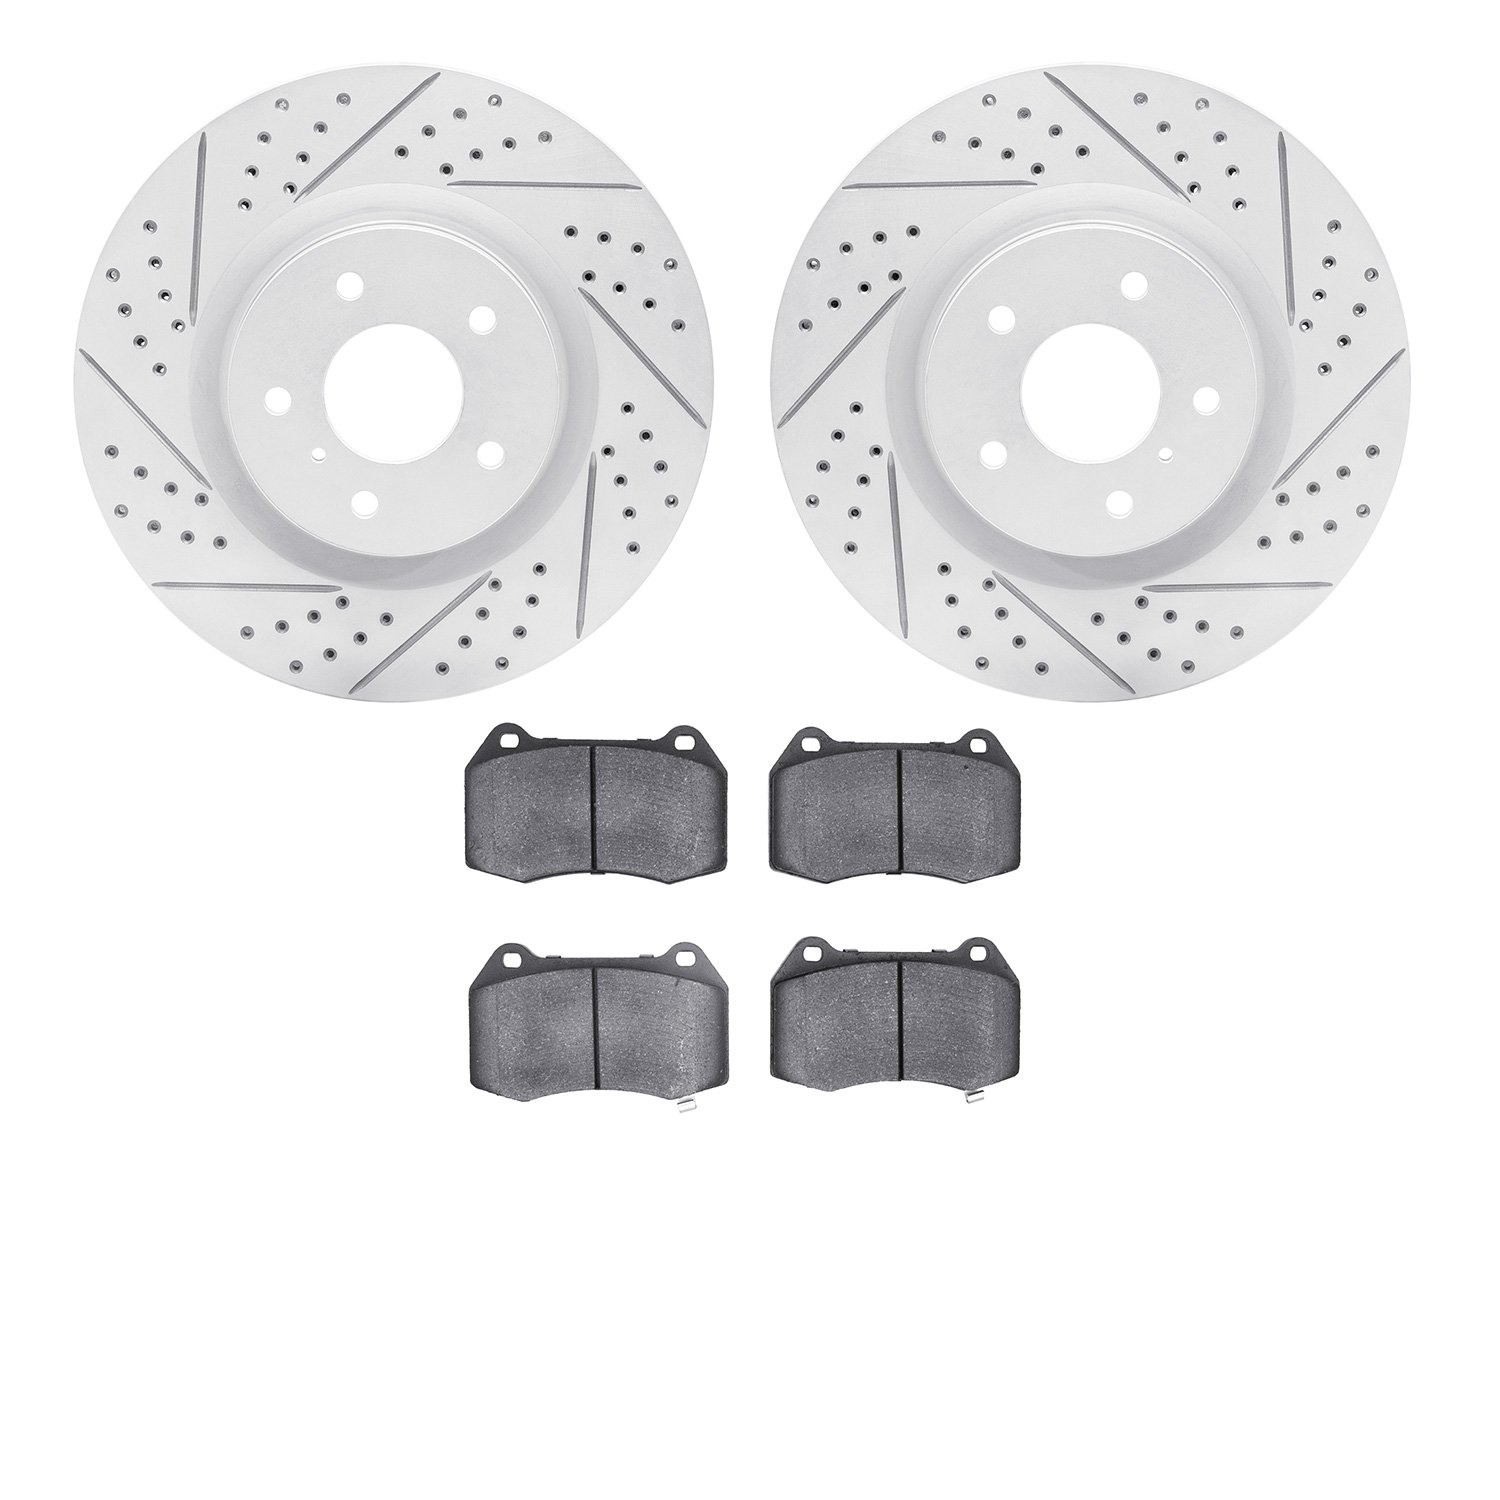 2502-68004 Geoperformance Drilled/Slotted Rotors w/5000 Advanced Brake Pads Kit, 2003-2008 Infiniti/Nissan, Position: Front